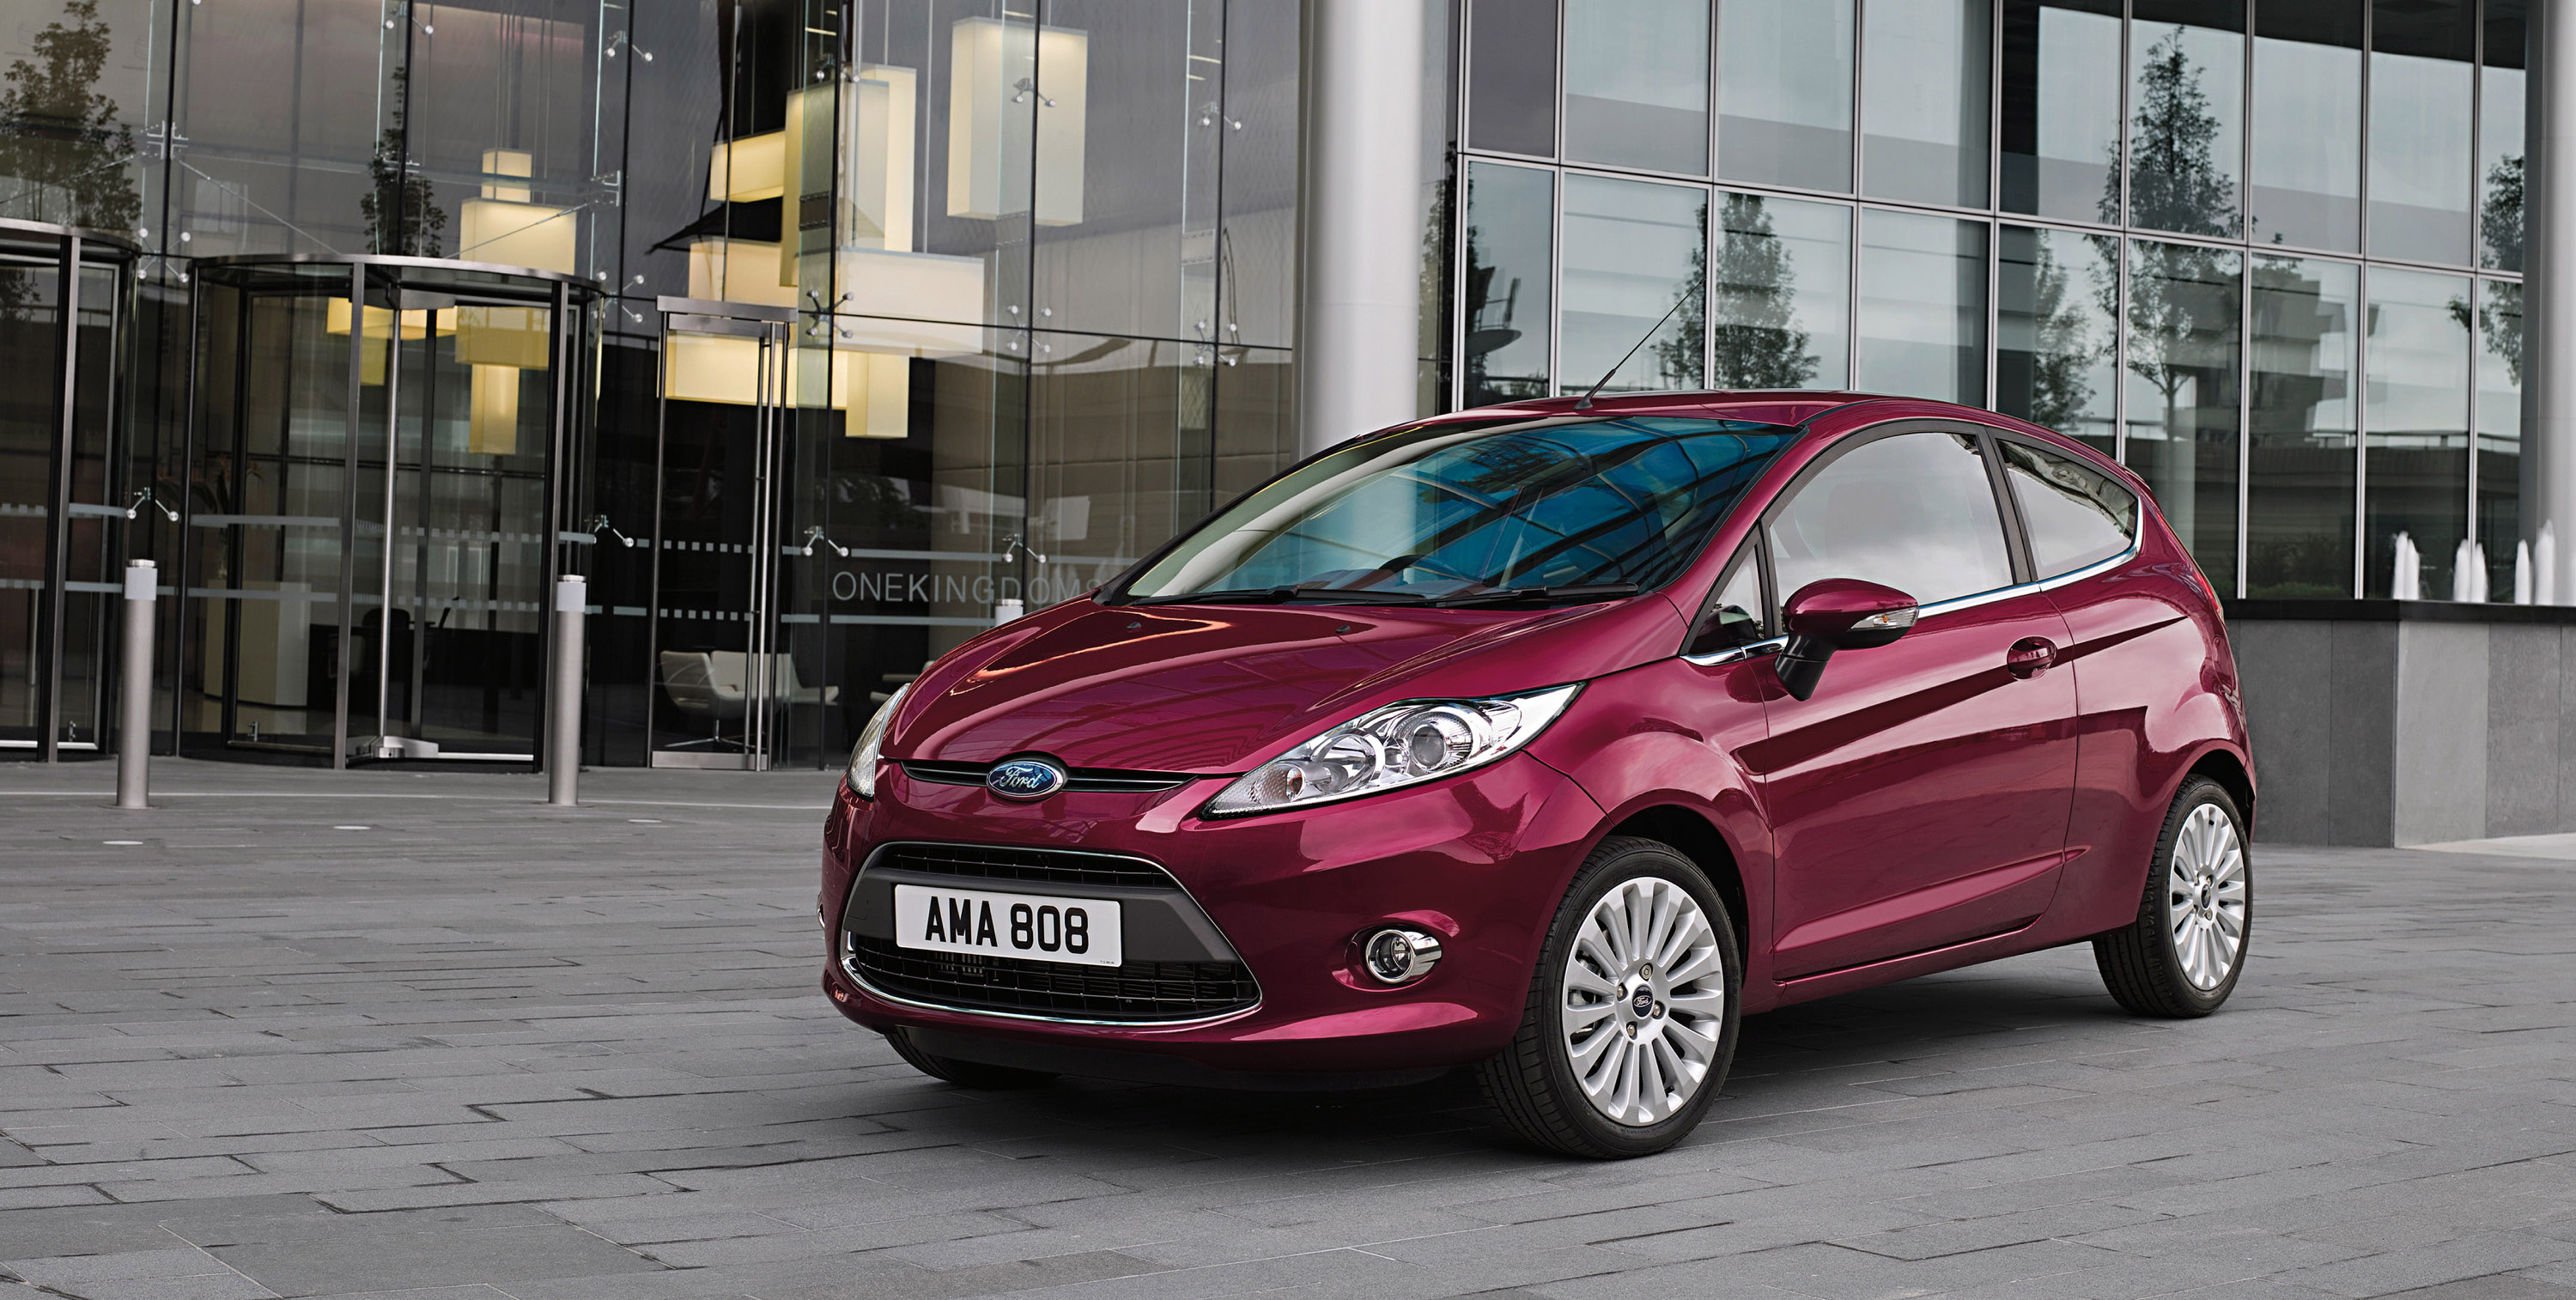 Ford Fiesta - HD Picture 1 of 12 #17775 - 3000x1514